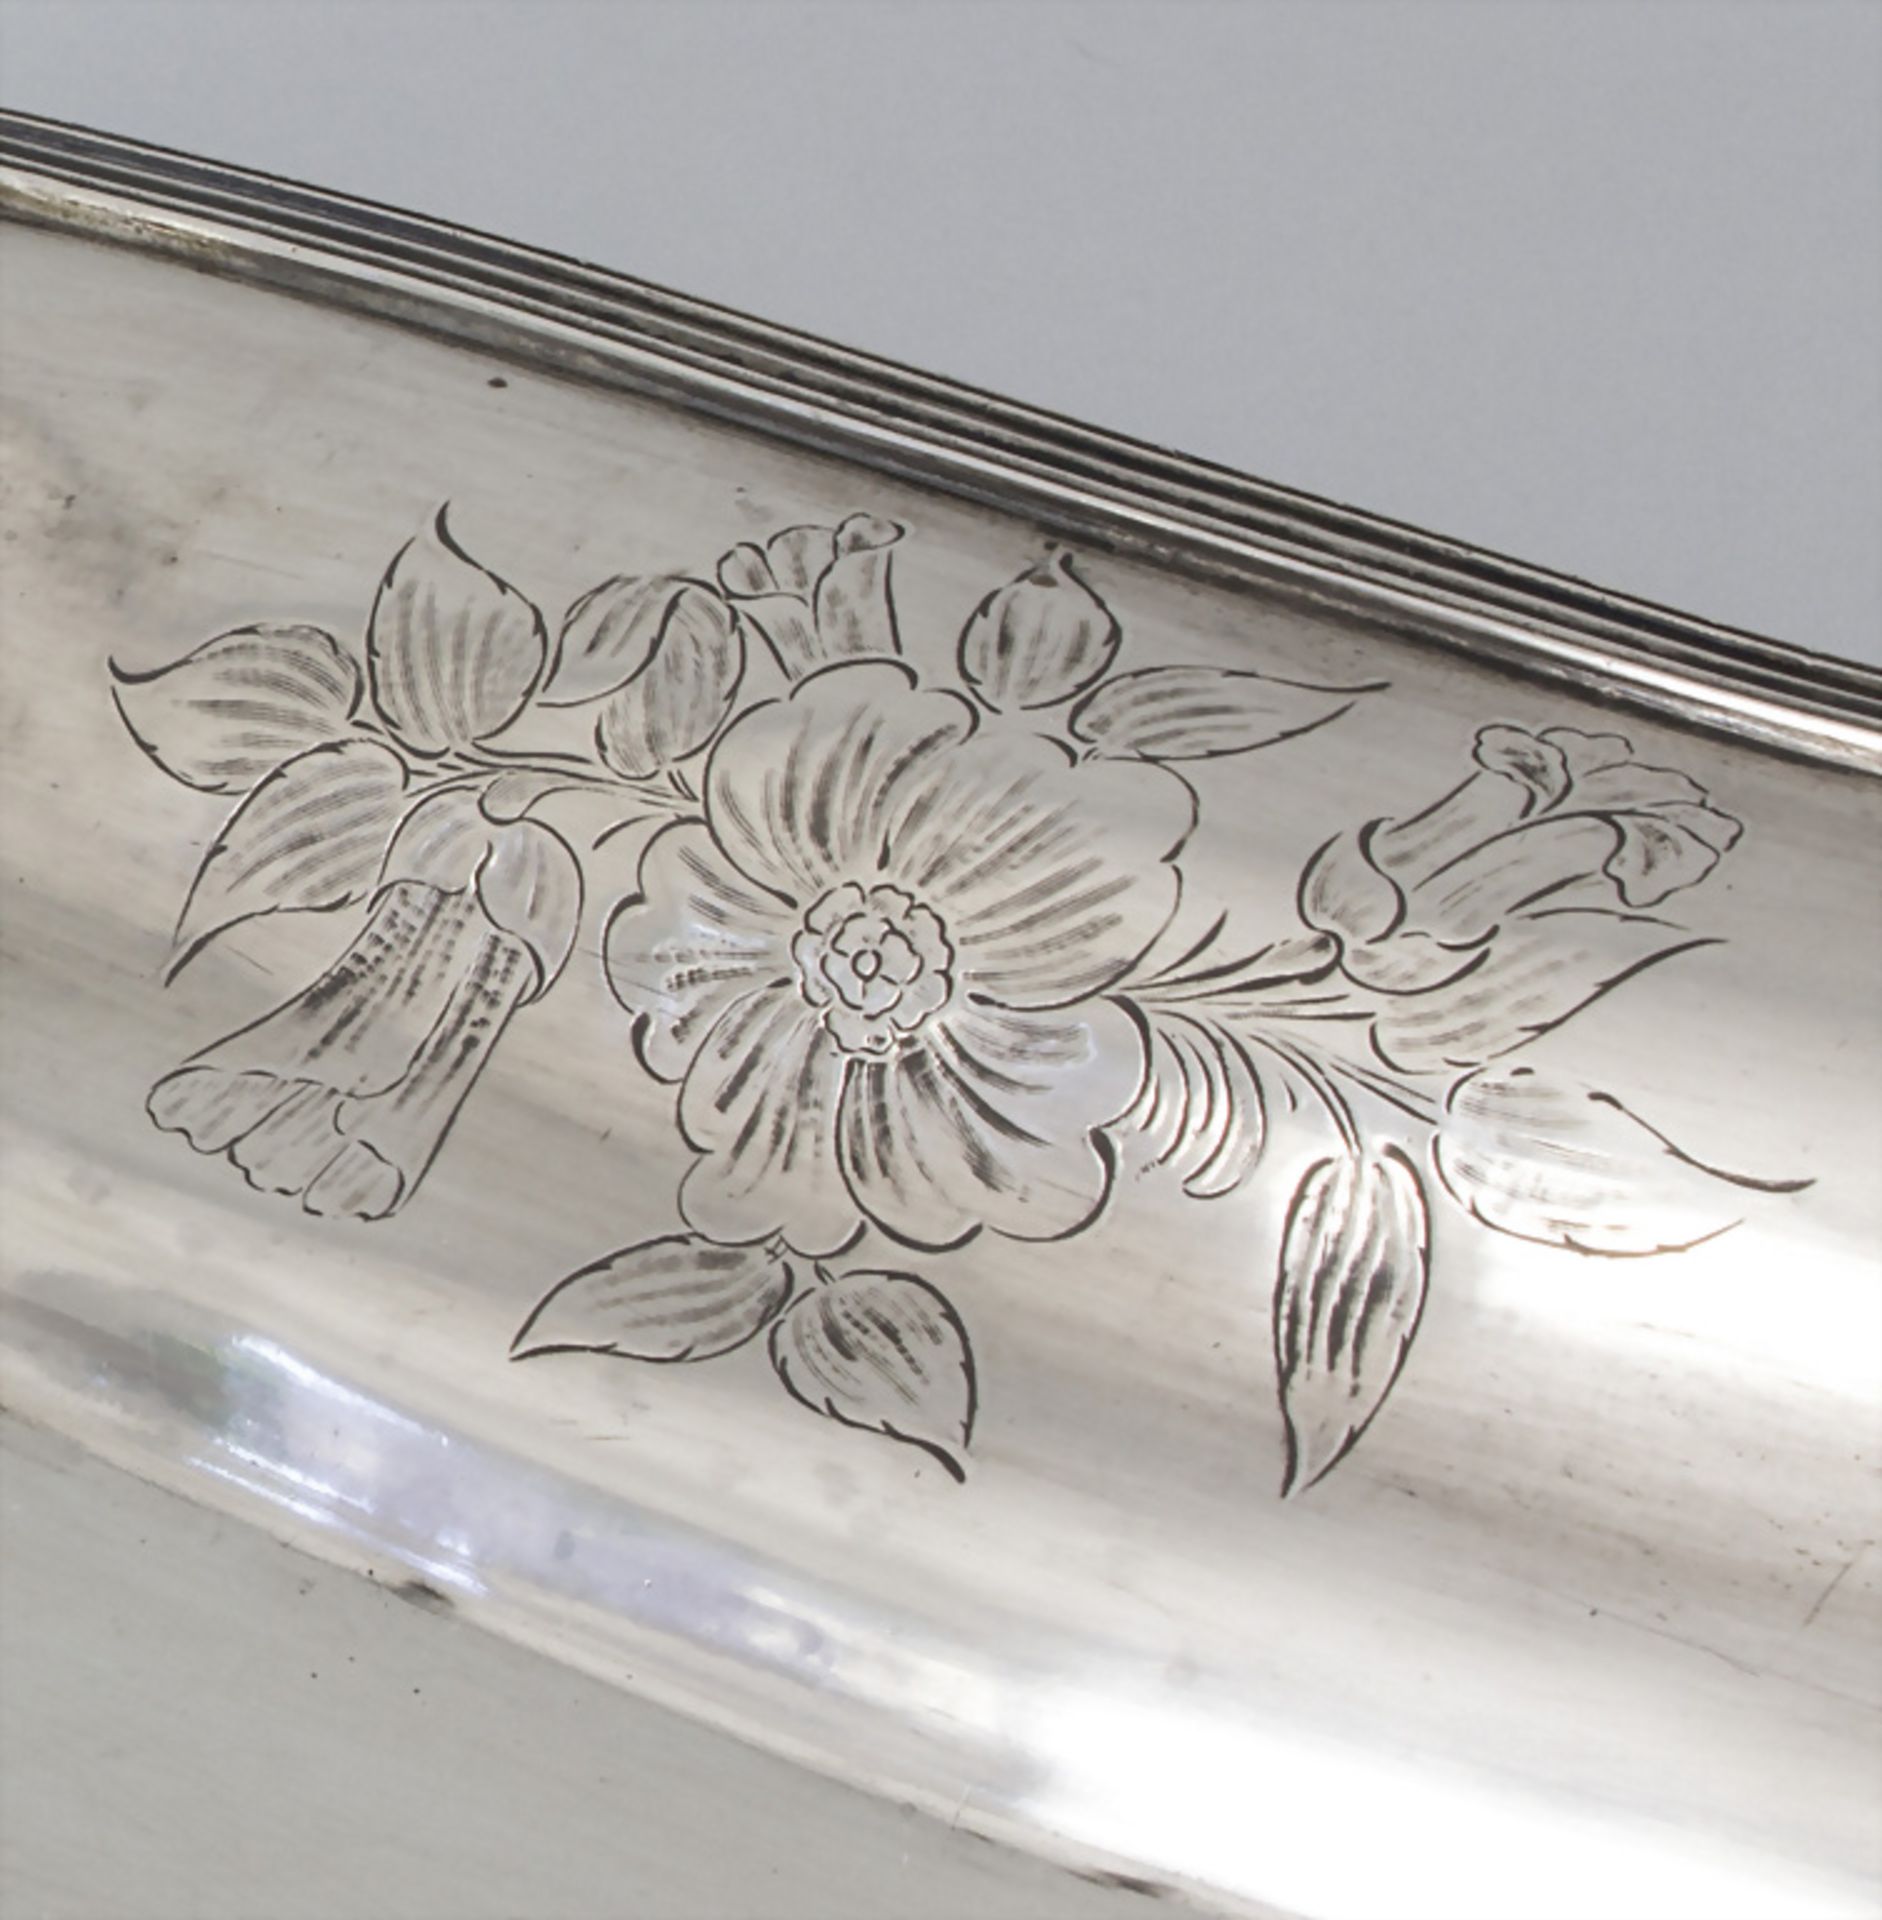 Großes Prunktablett / A large silver tray, Galtes, Barcelona, 19. Jh. - Image 5 of 9